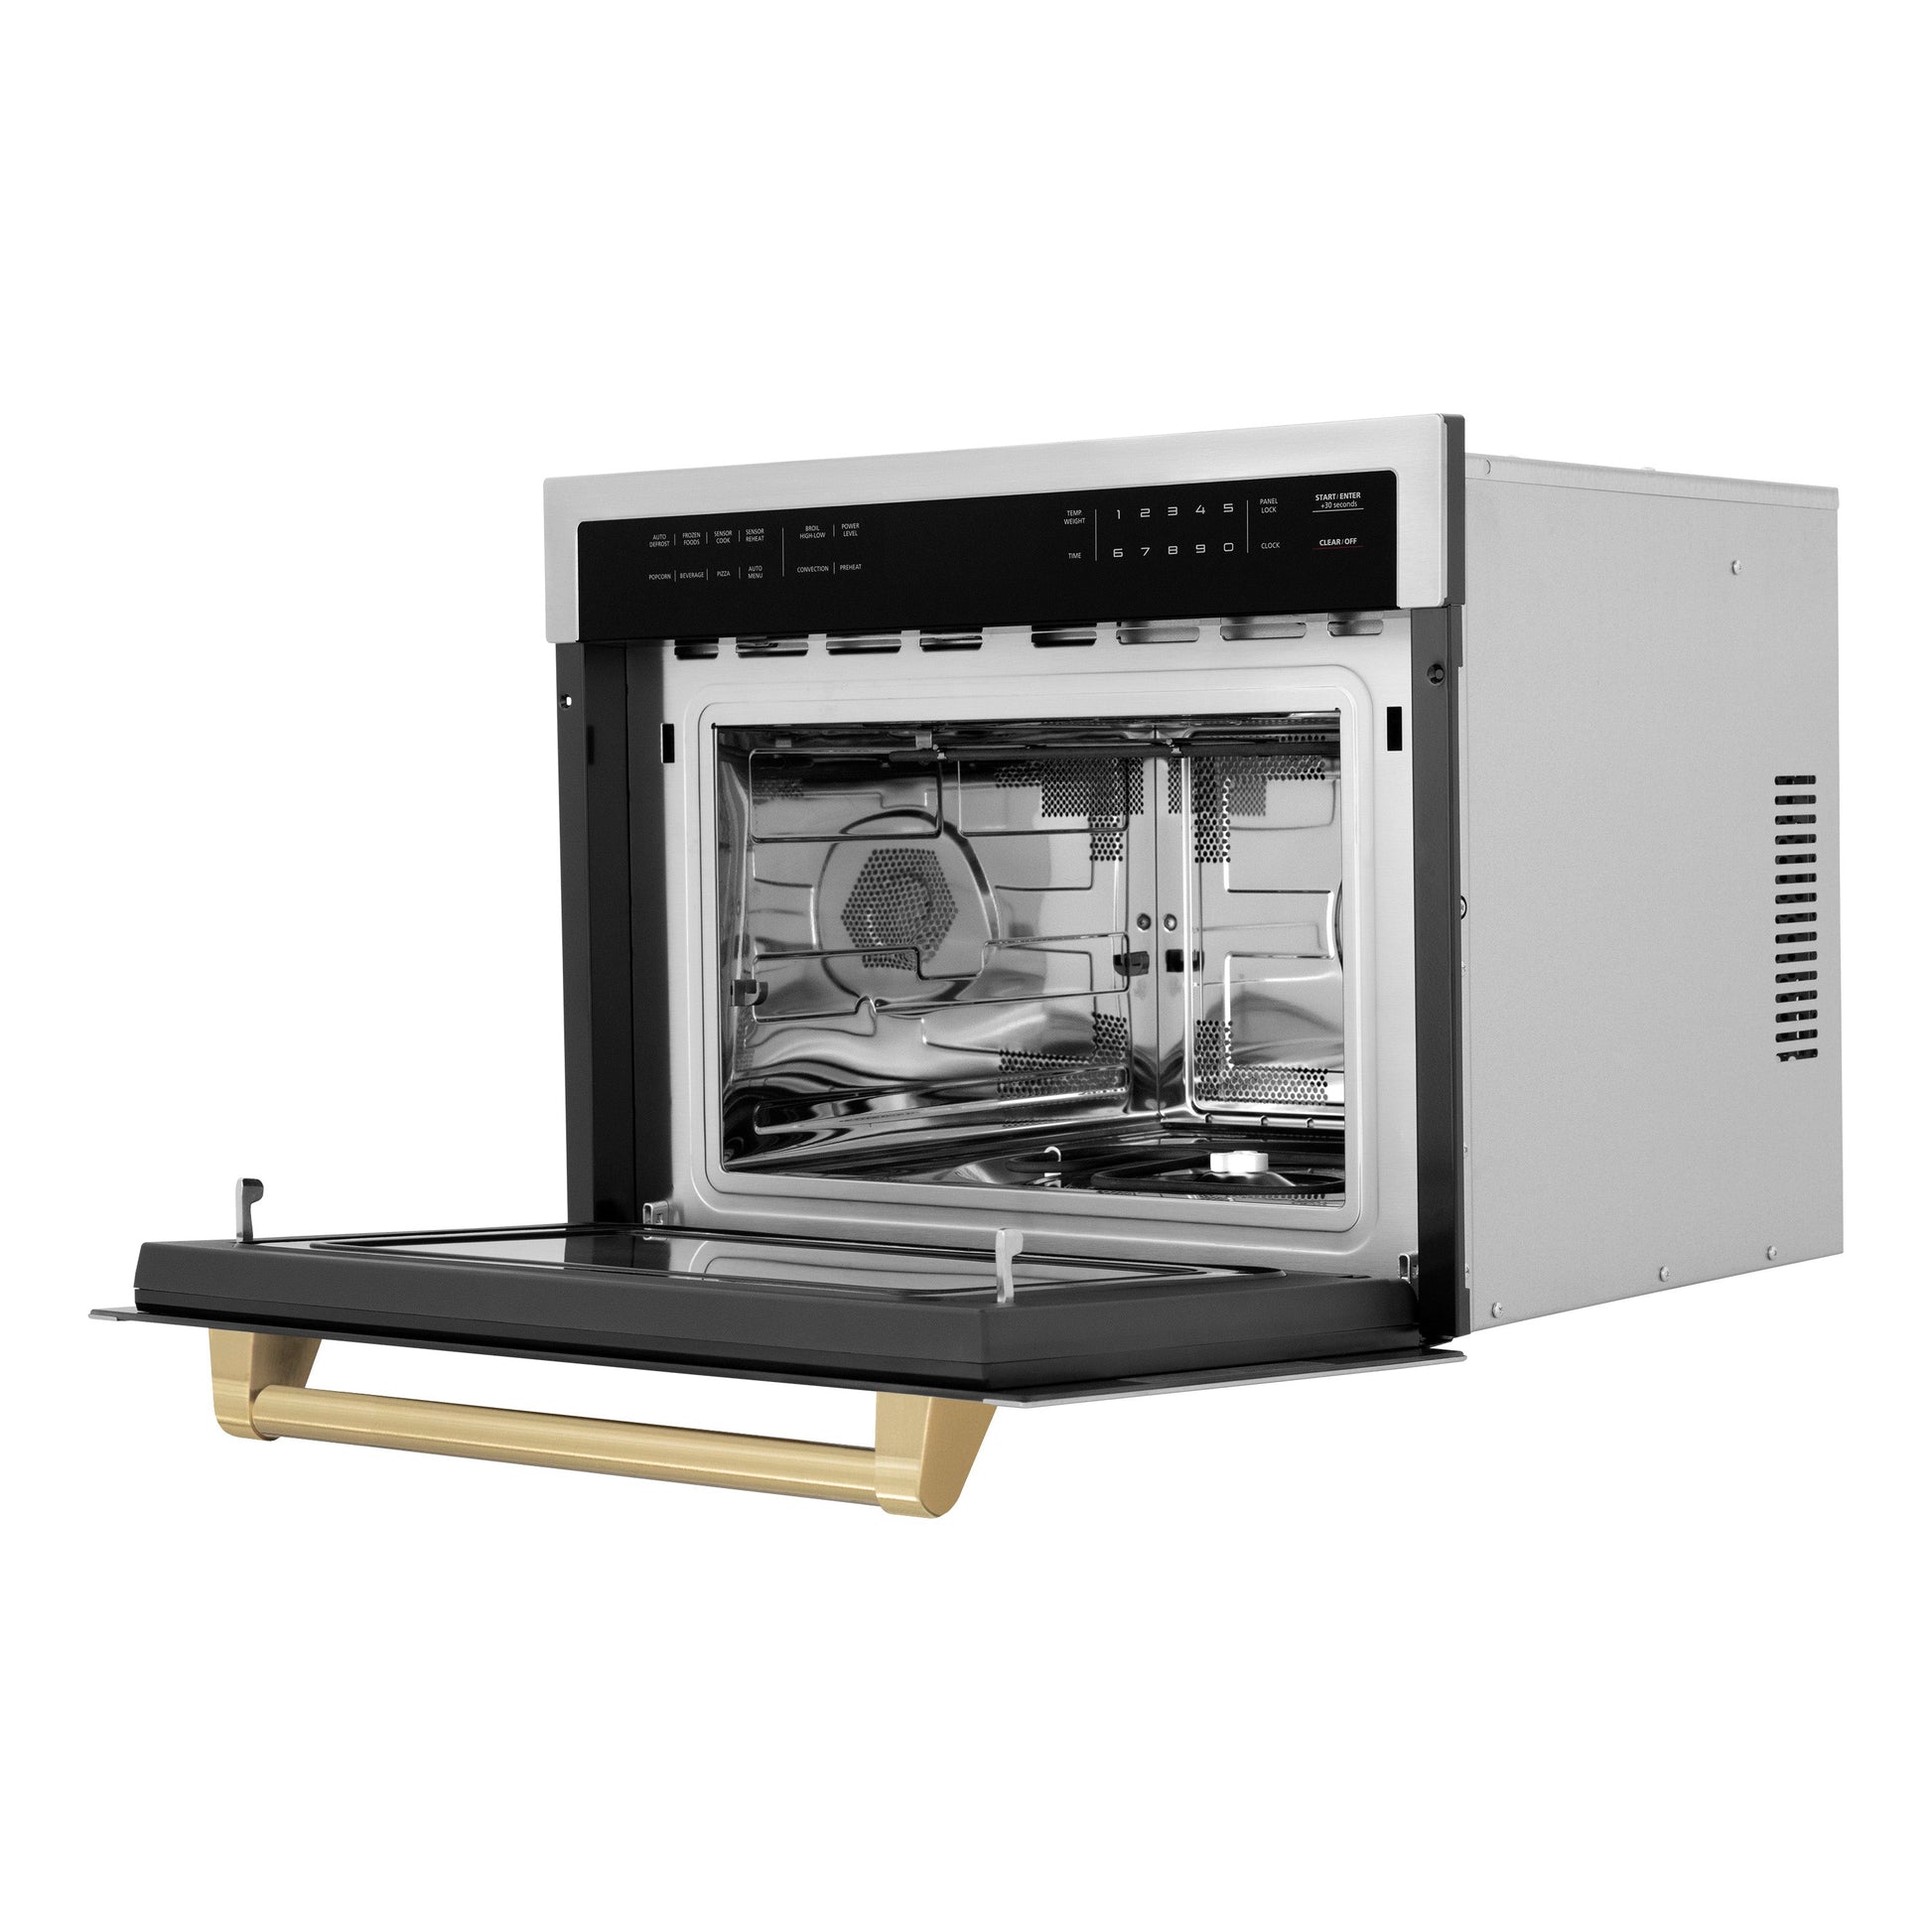 ZLINE Autograph Edition 24" Built-in Convection Microwave Oven - Stainless Steel with Accents